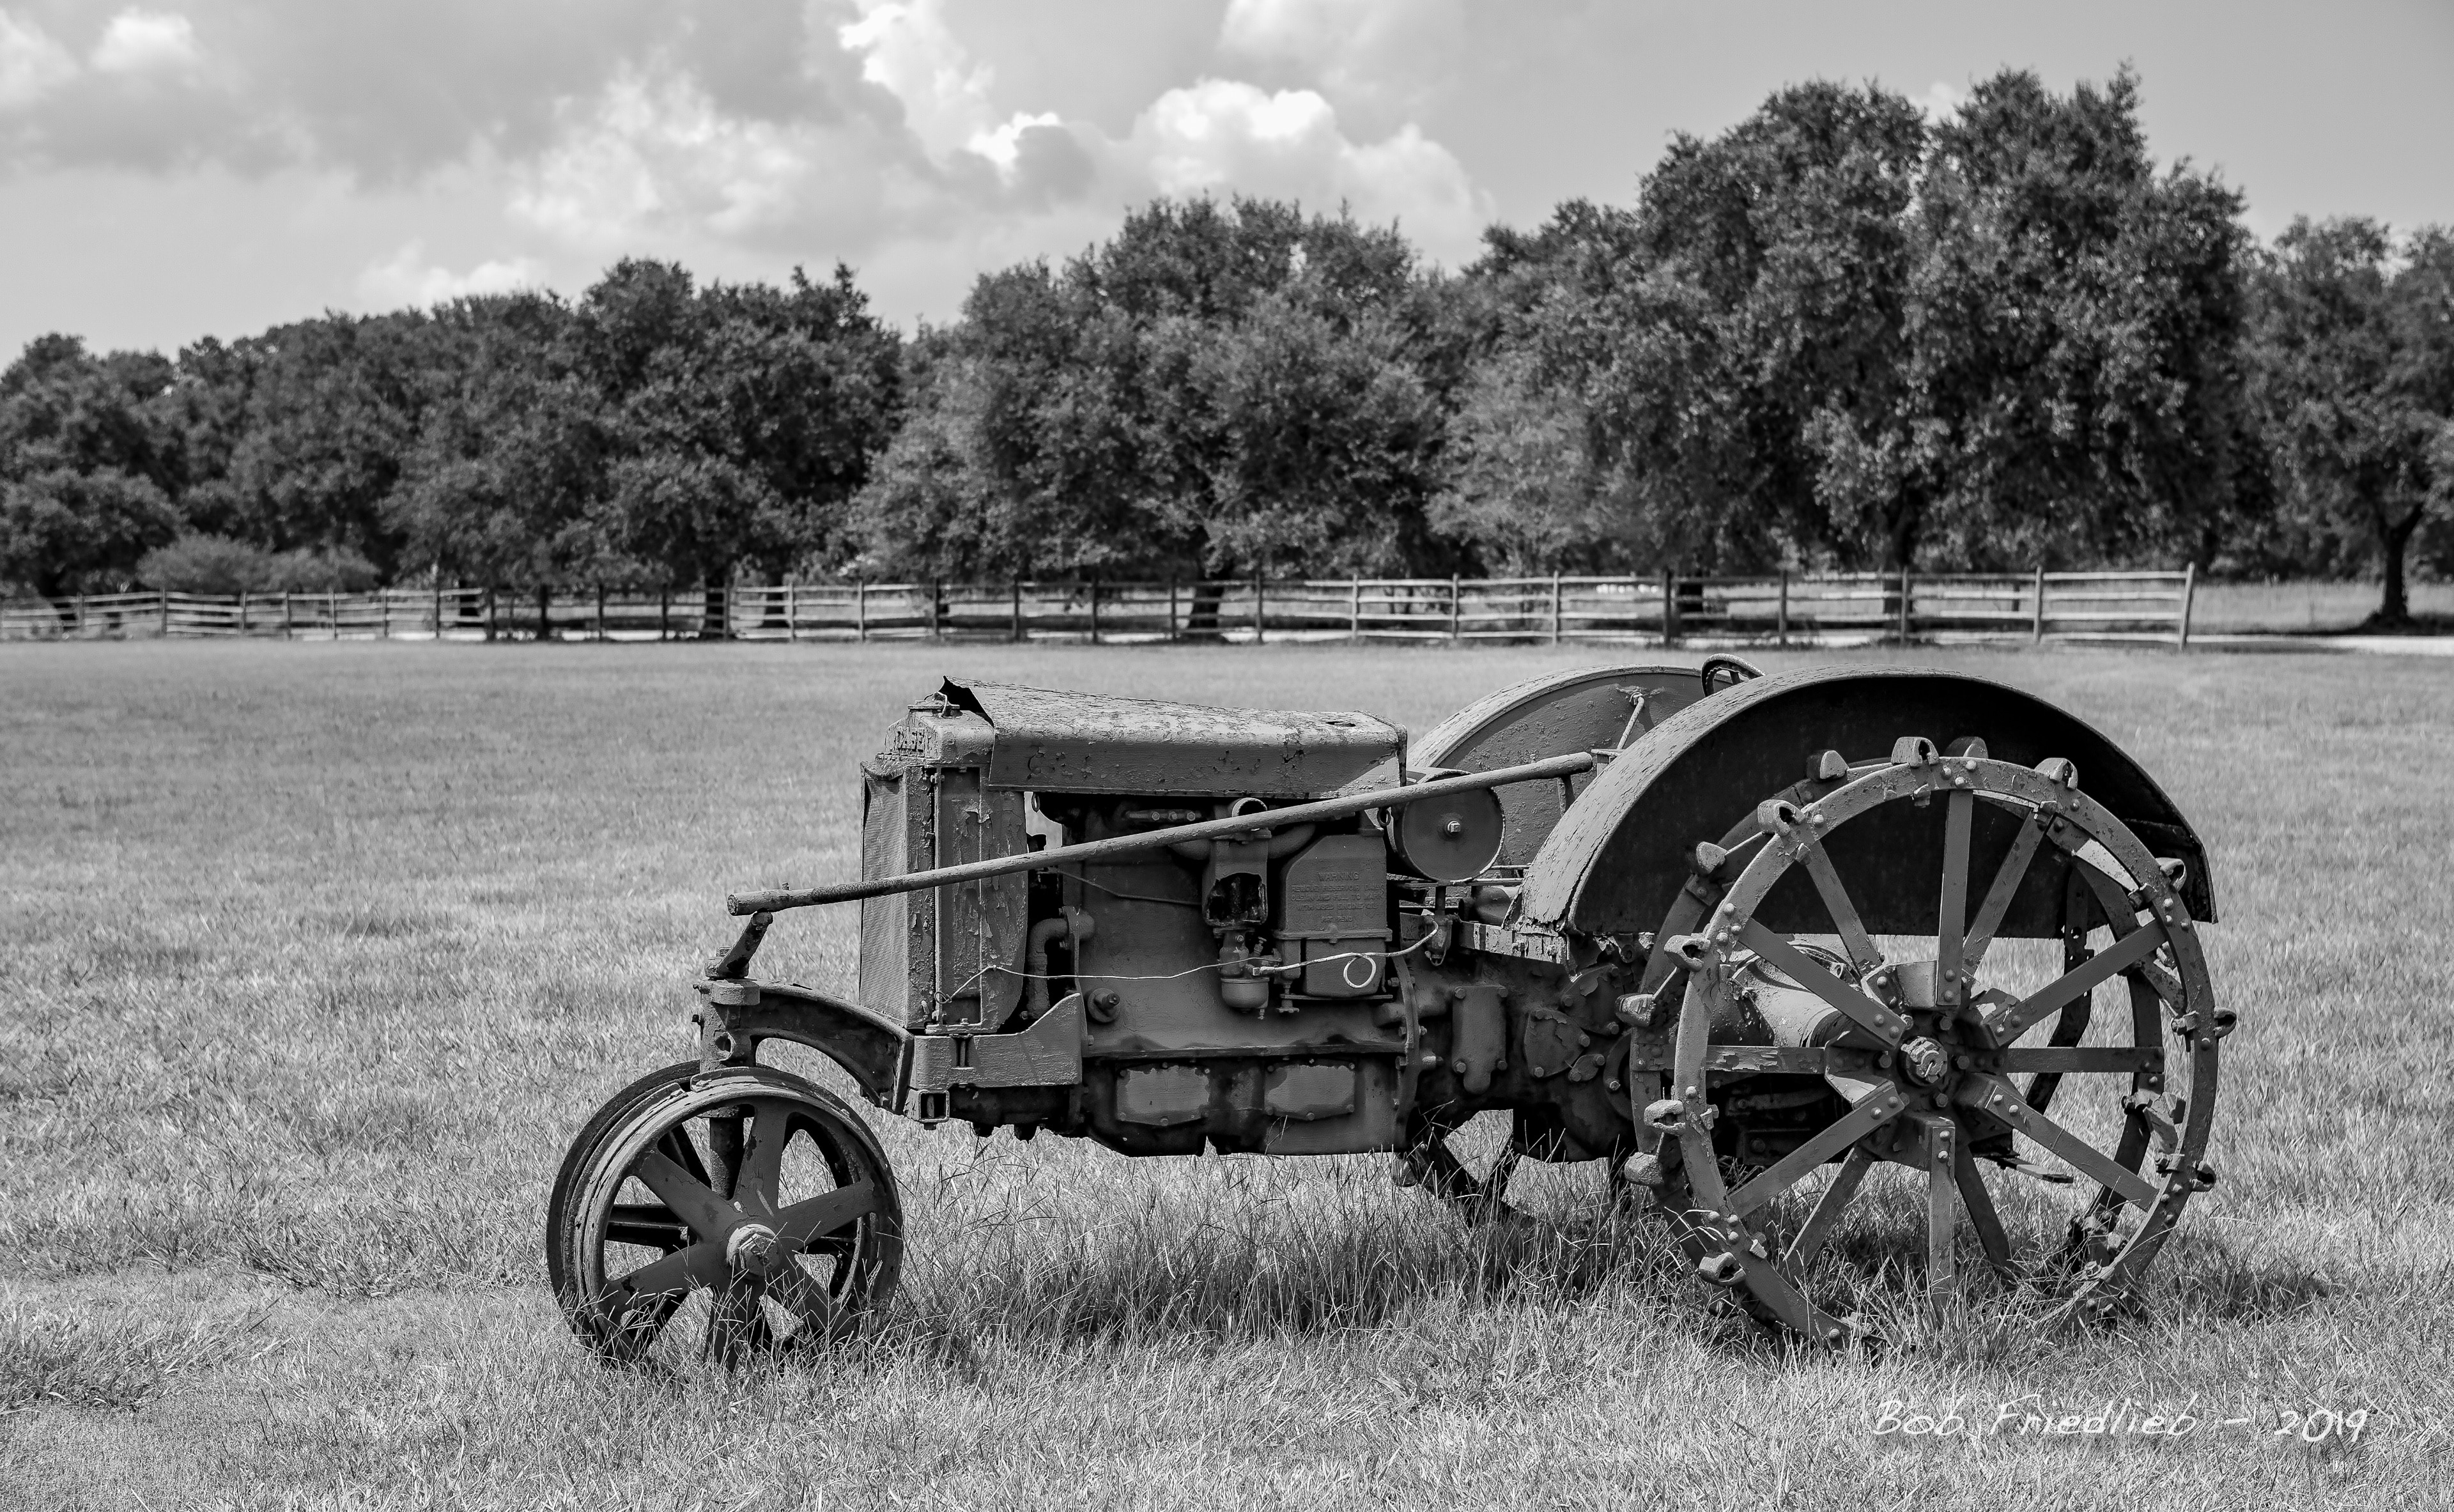 A well used piece of antique farm machinery